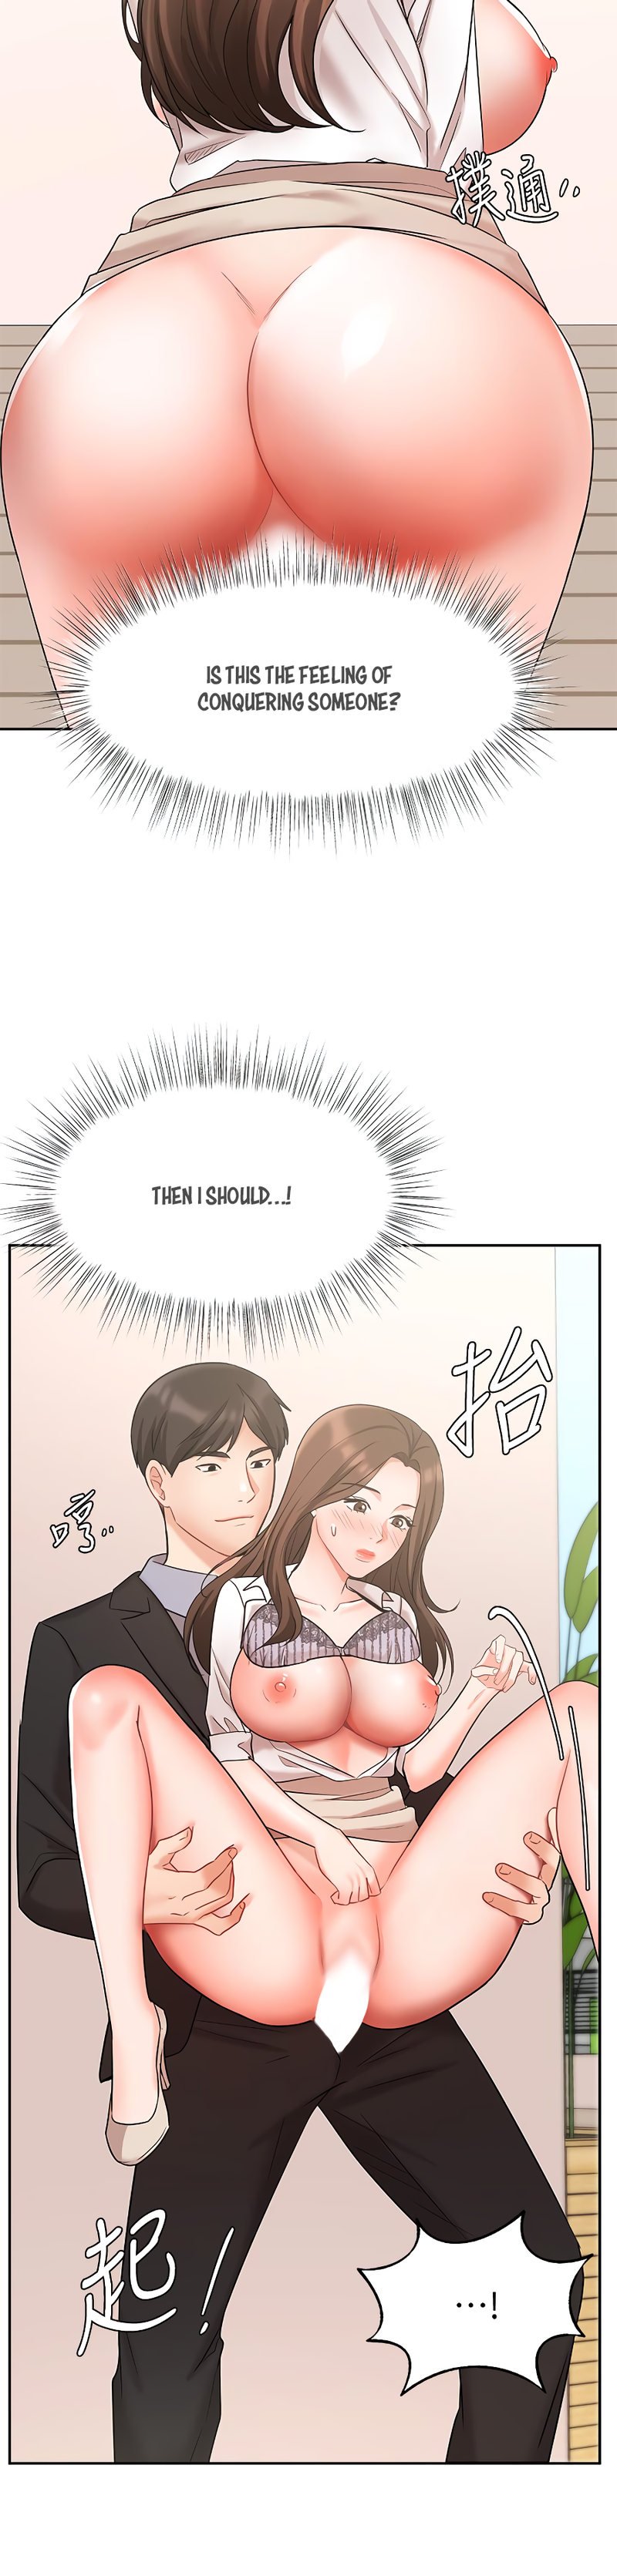 sold-out-girl-chap-38-10